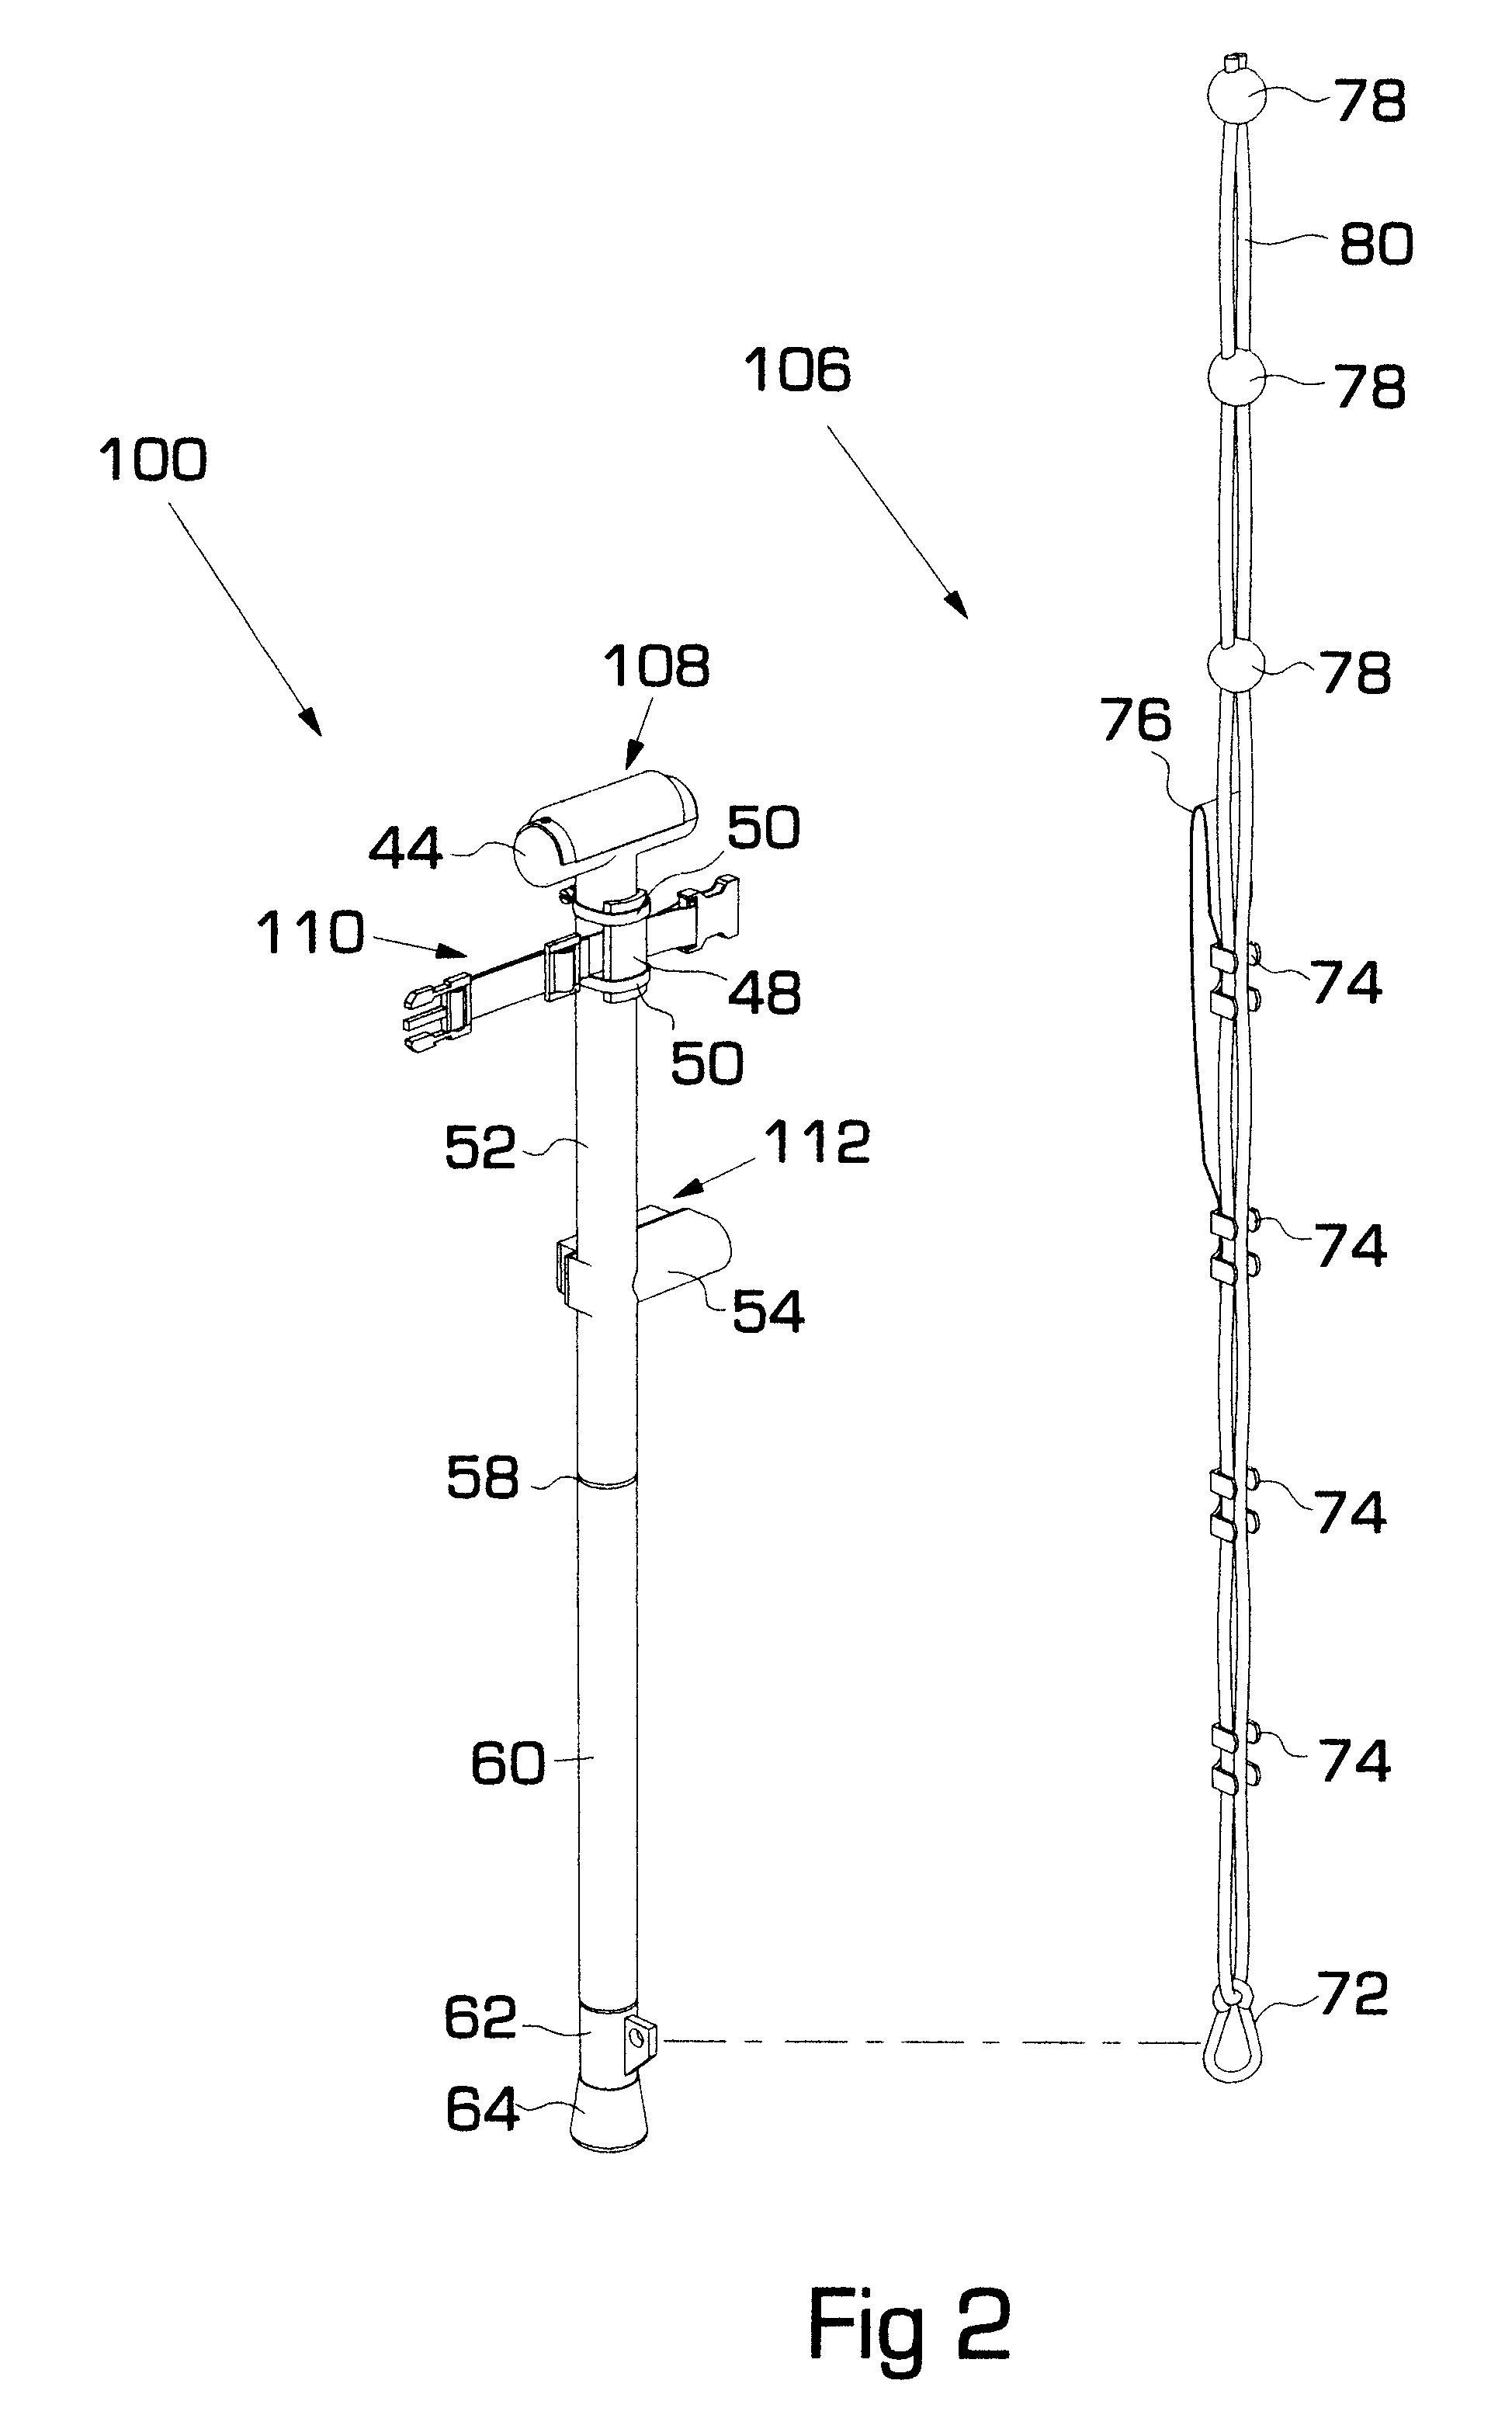 Line and pole, travel size fitness device, for upper and lower body weightlifting type physical exercises, utilizing a human's own bodyweight